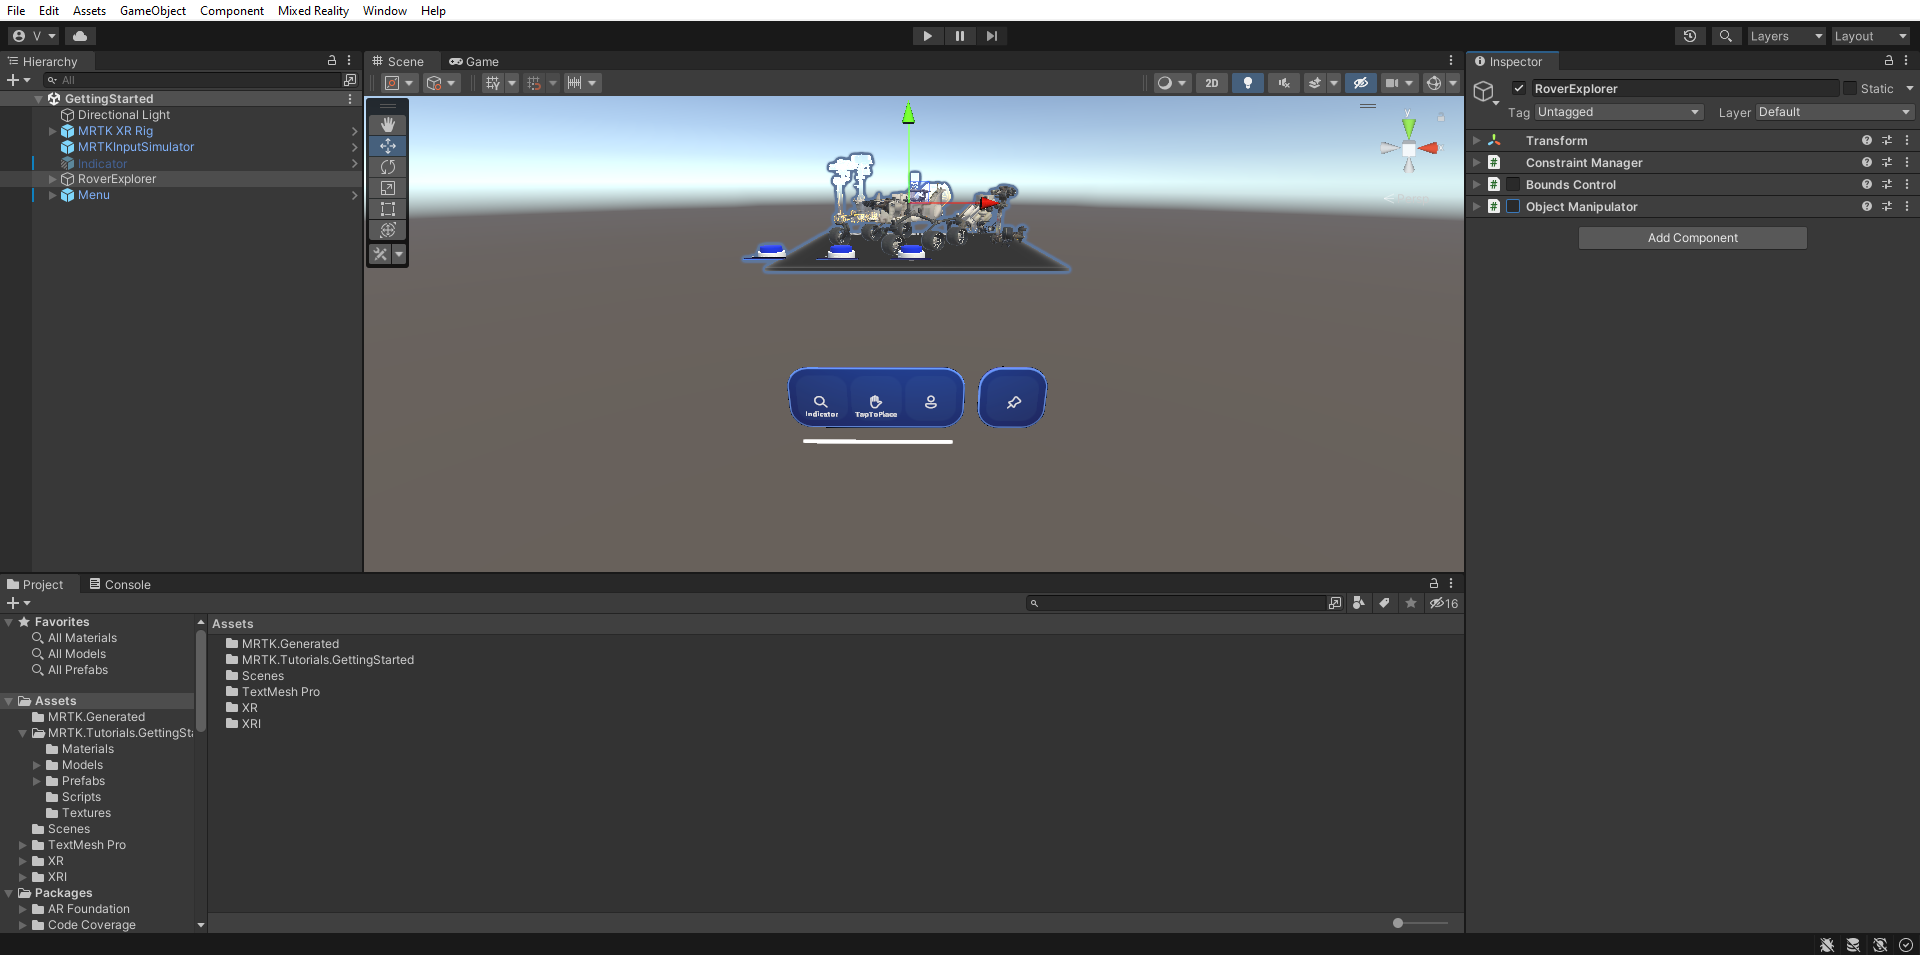 Screenshot of Unity with RoverExplorer object selected and components added and disabled.